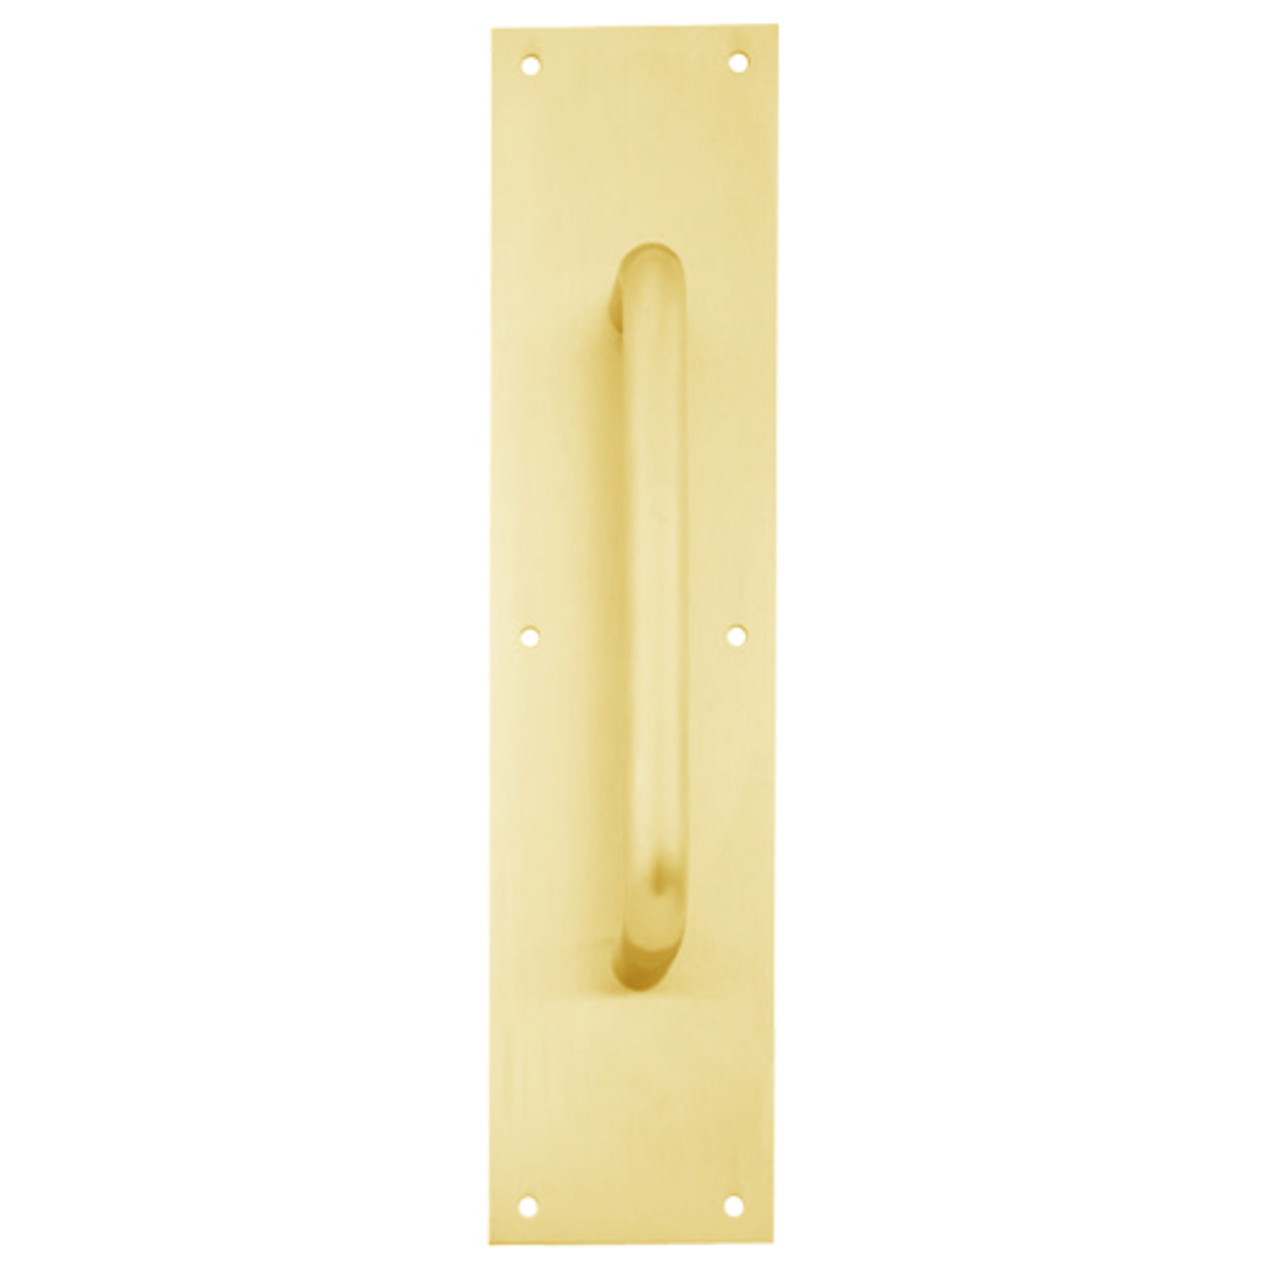 8302-10-US3-3-5x15 IVES Architectural Door Trim 3.5x15 Inch Pull Plate in Bright Brass